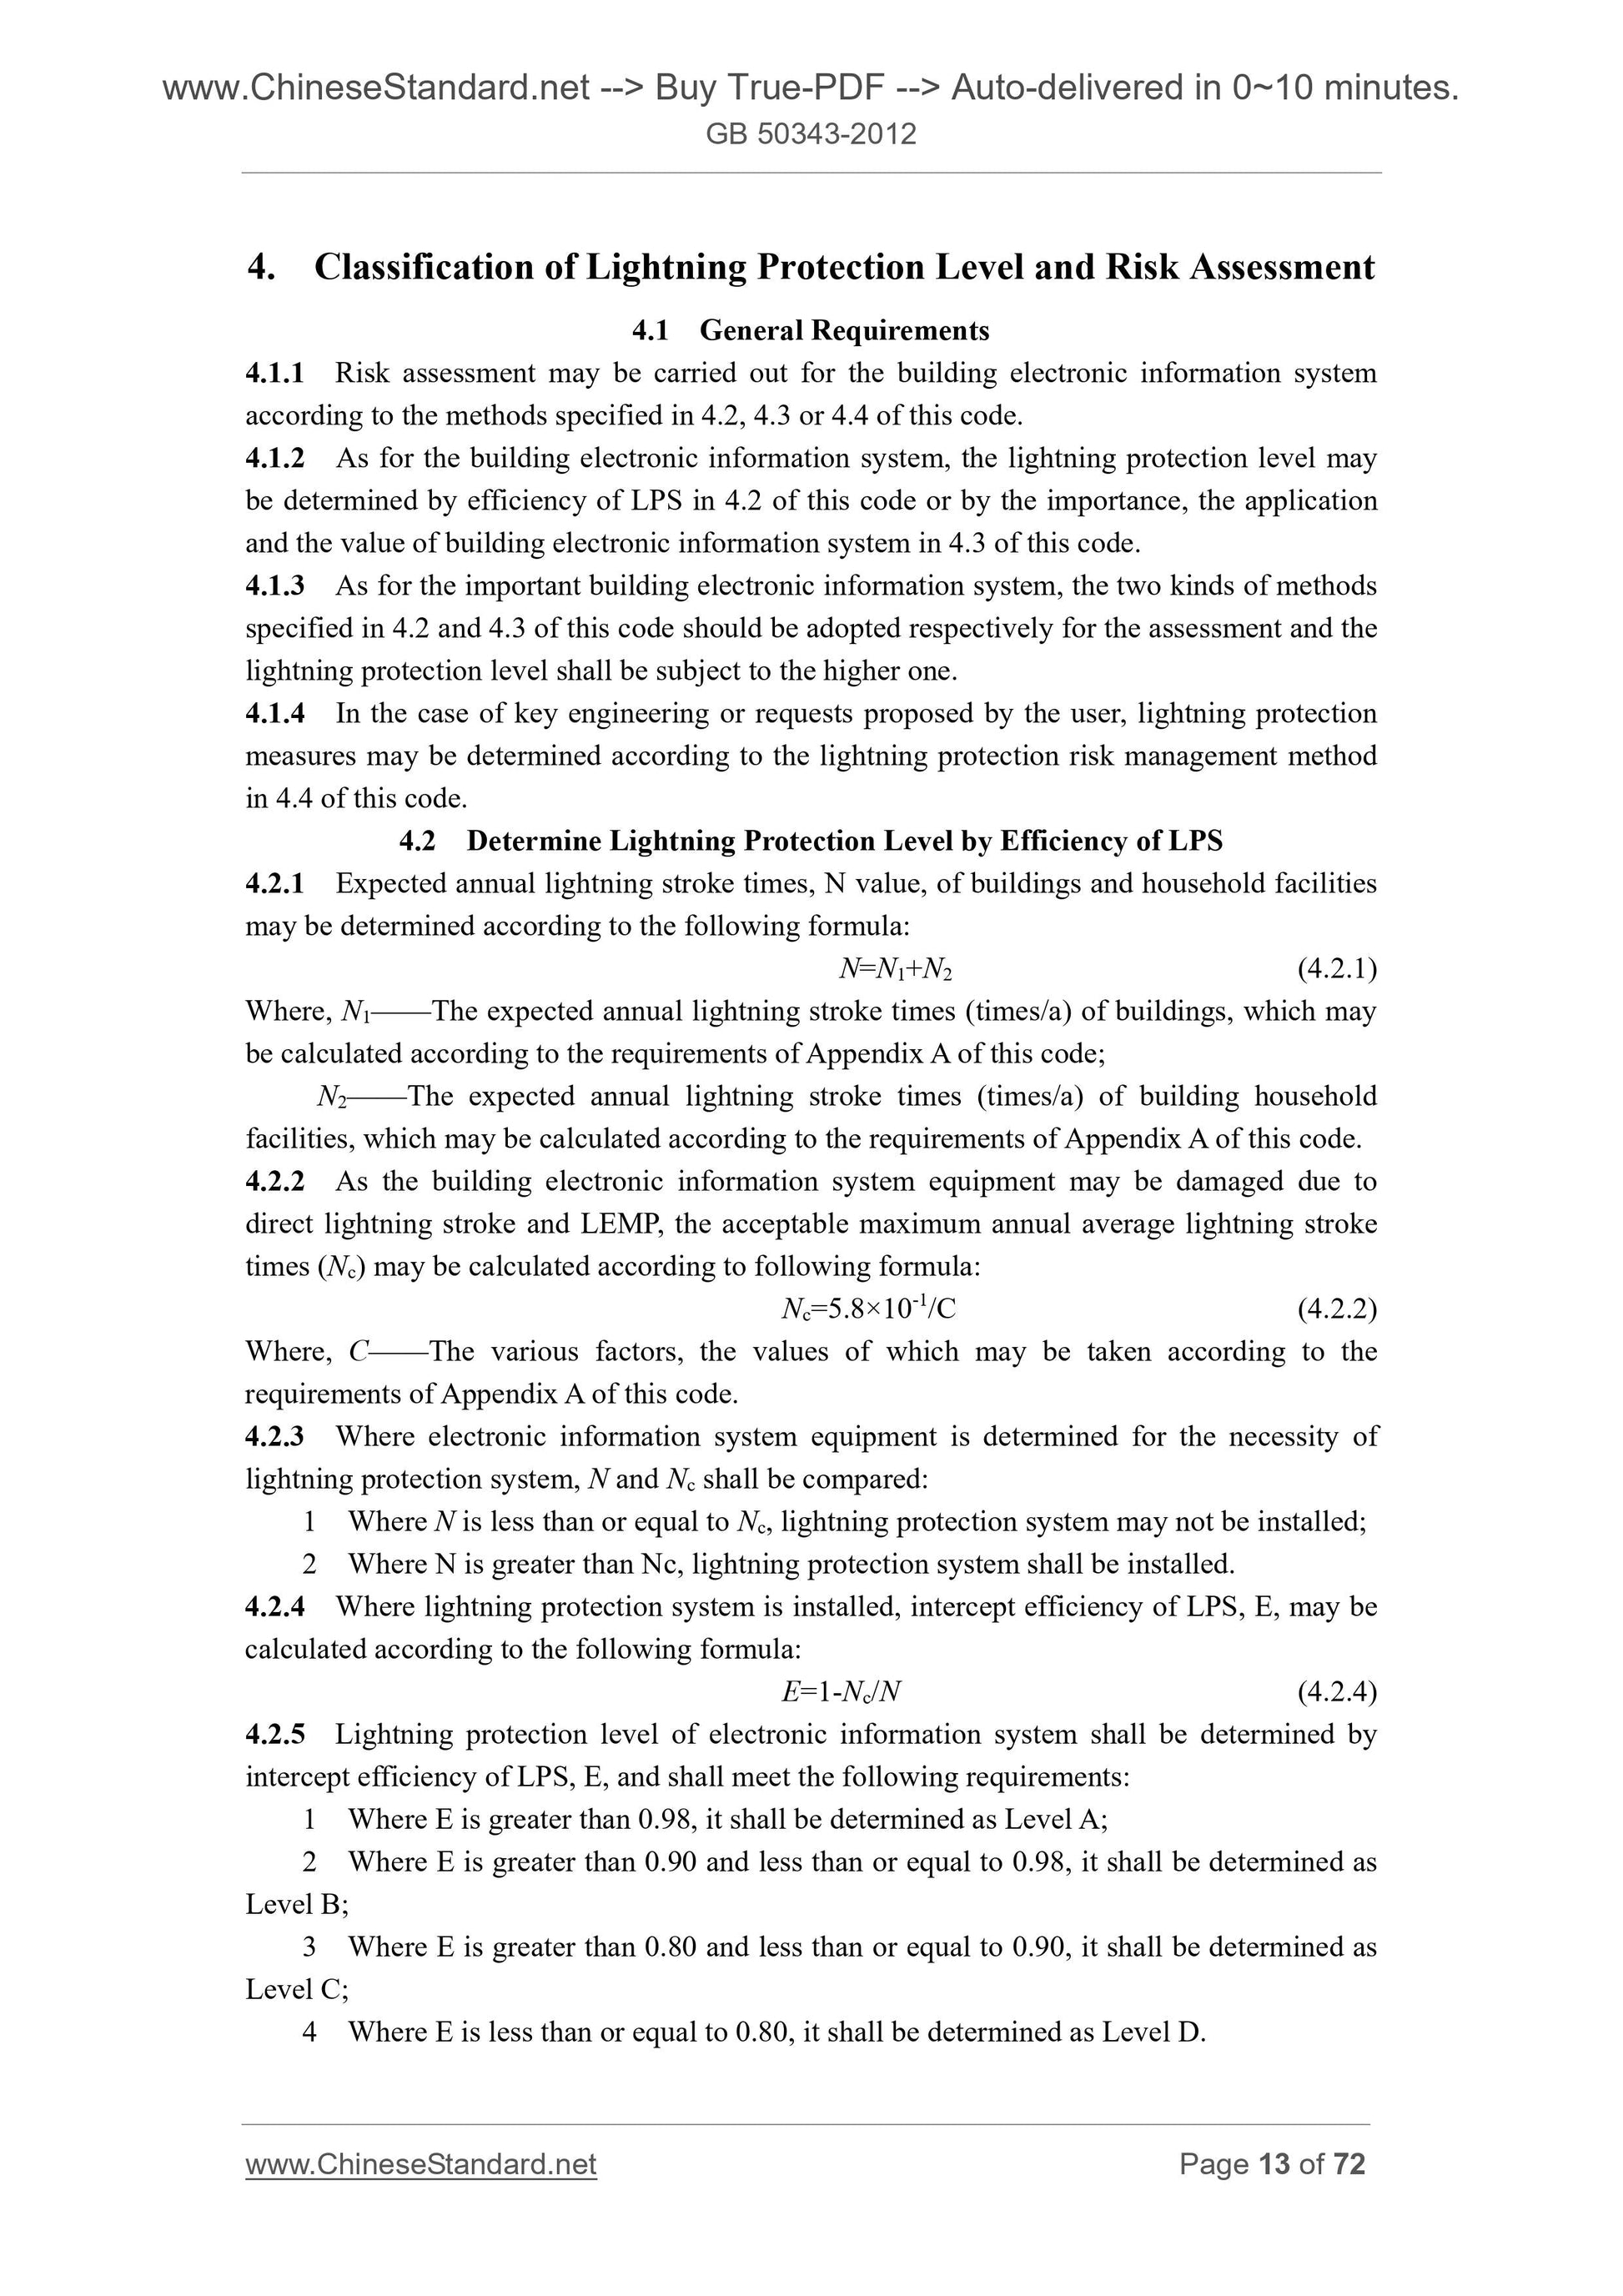 GB 50343-2012 Page 8